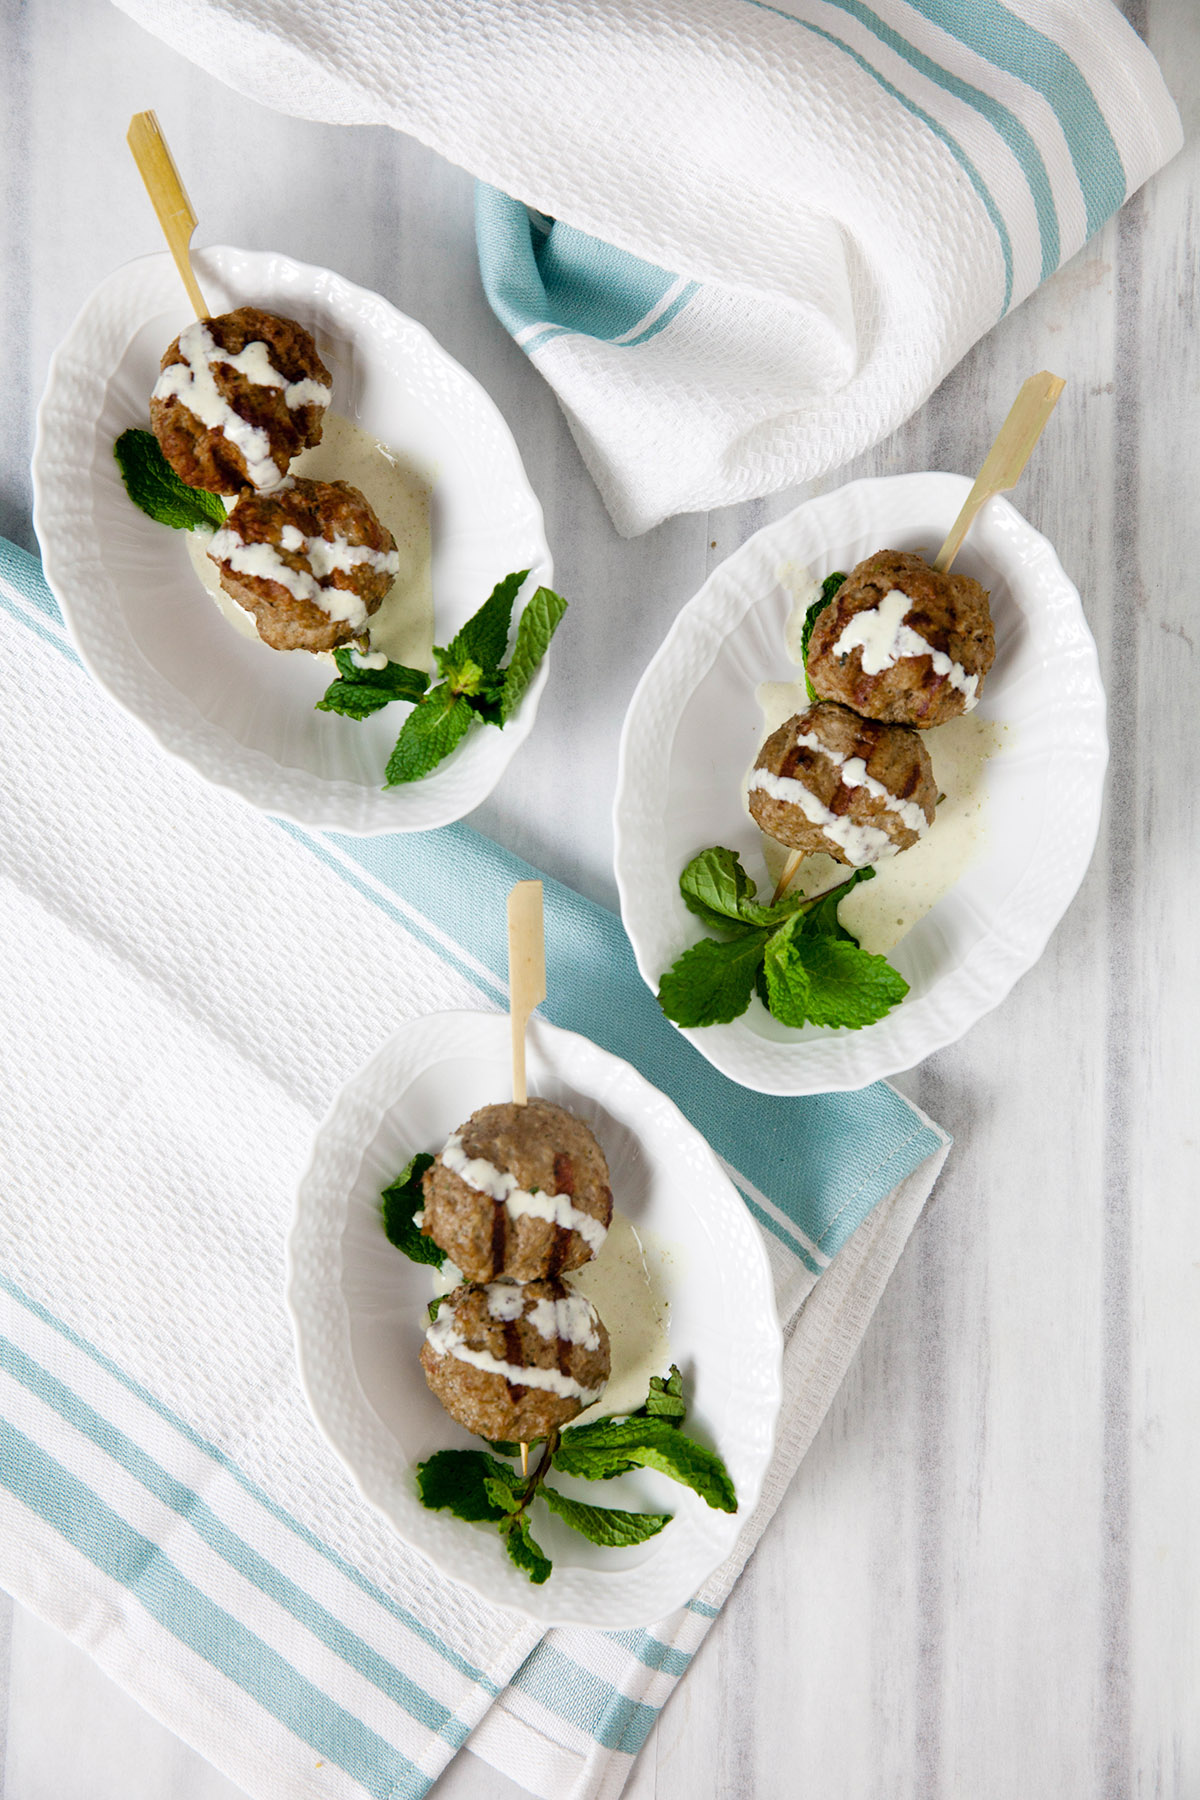 Grilled Lamb Meatballs with Minted Yogurt Sauce